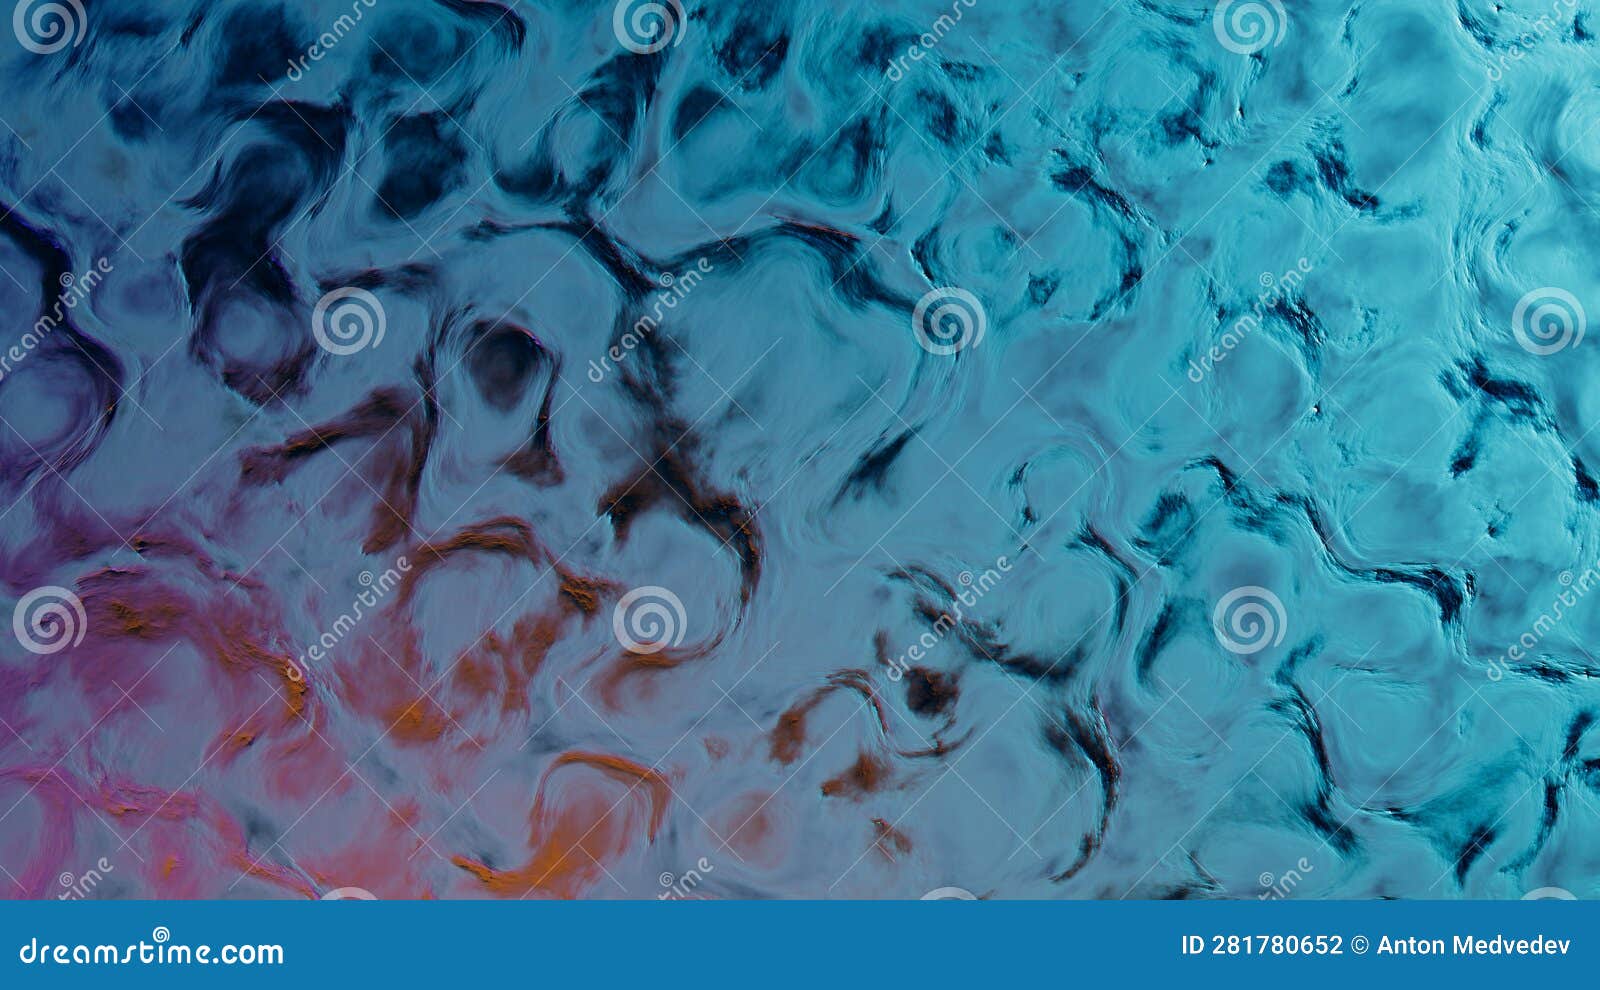 organized contour relief bg of teal and pink messy shaked colors - abstract 3d 